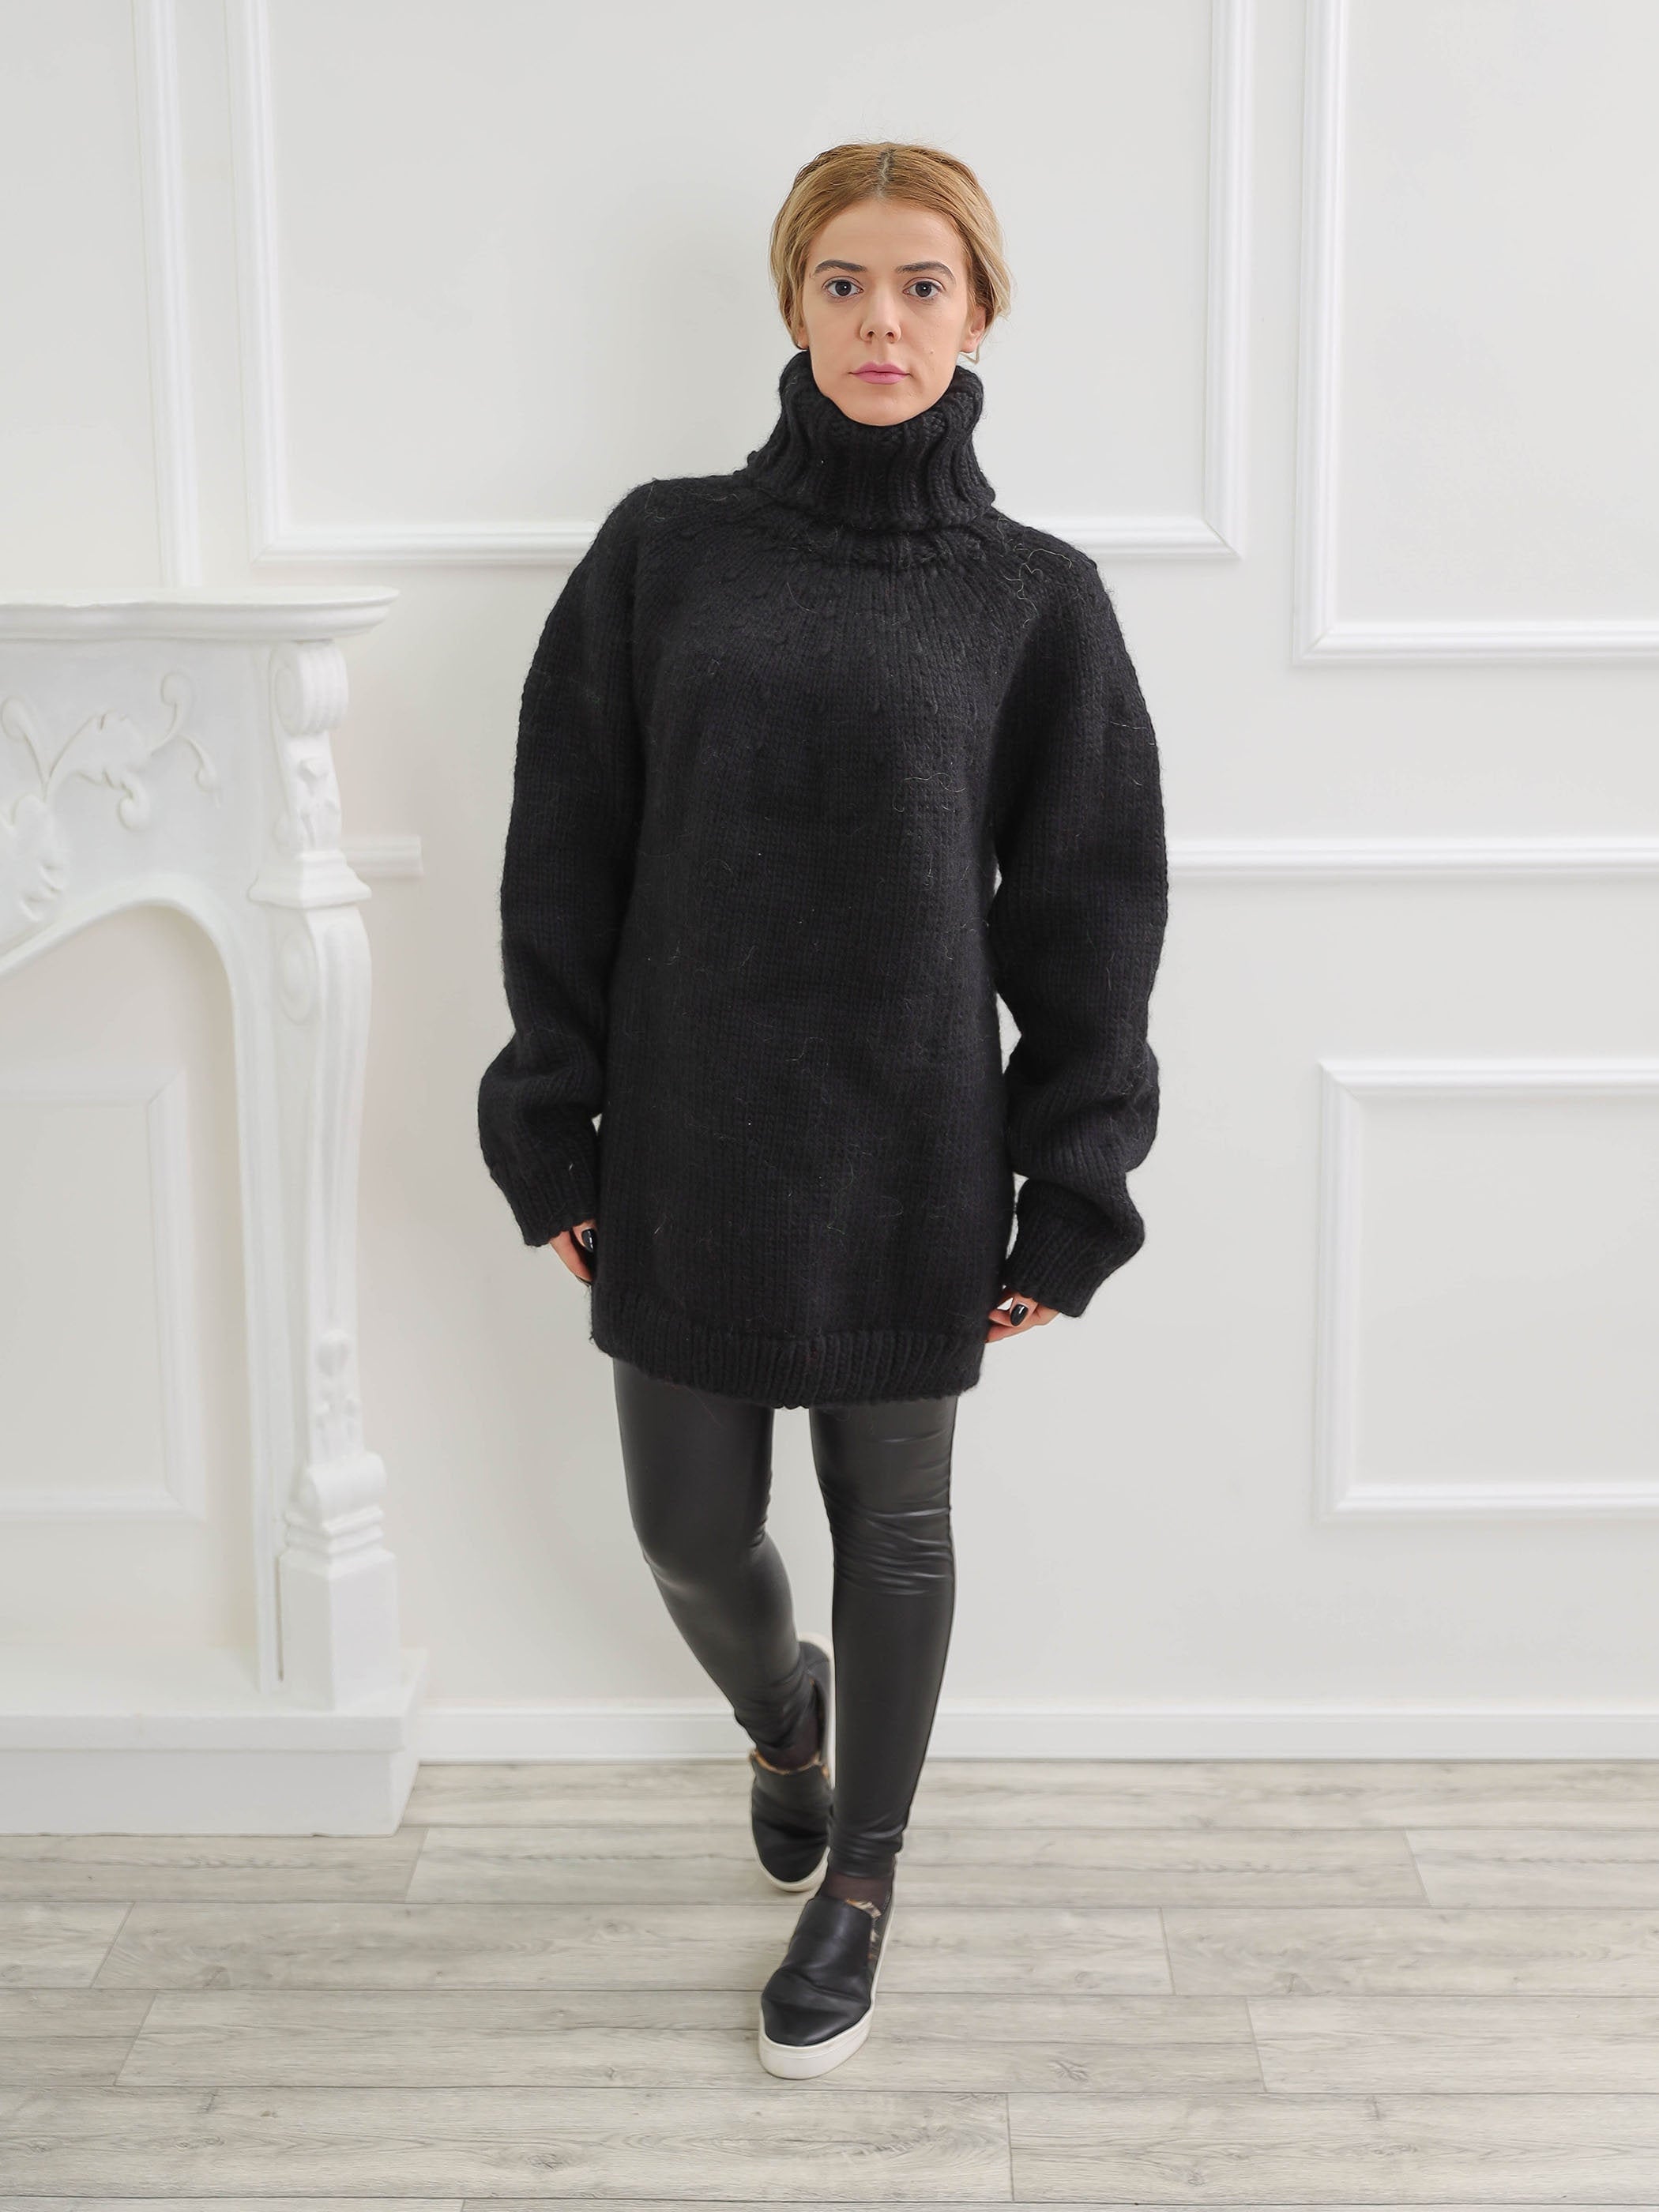 Black Oversize Wool Sweater Chunky Turtleneck Wool Pullover - Etsy